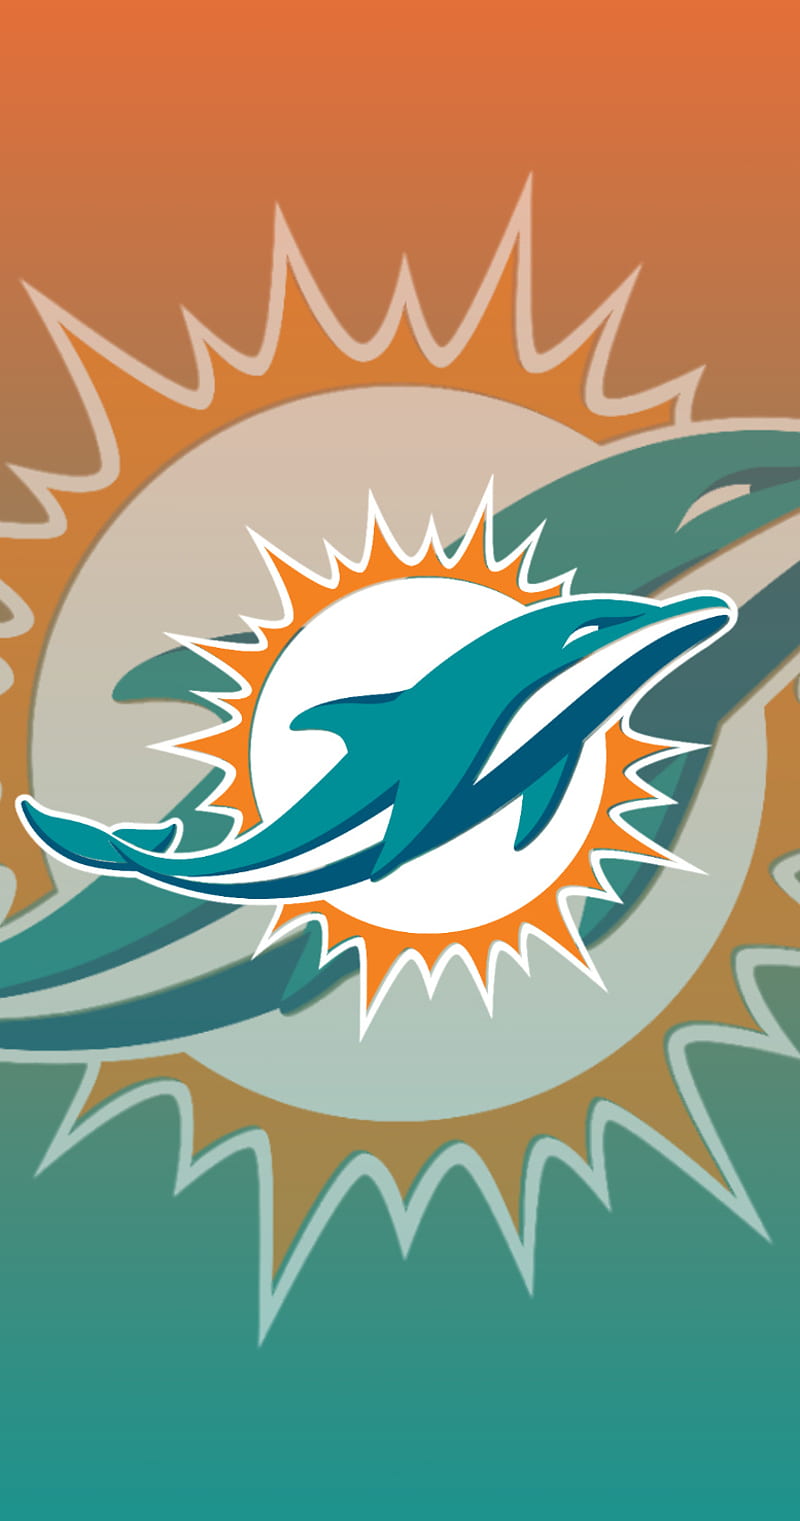 Share 53+ iphone miami dolphins wallpaper super hot - in.cdgdbentre